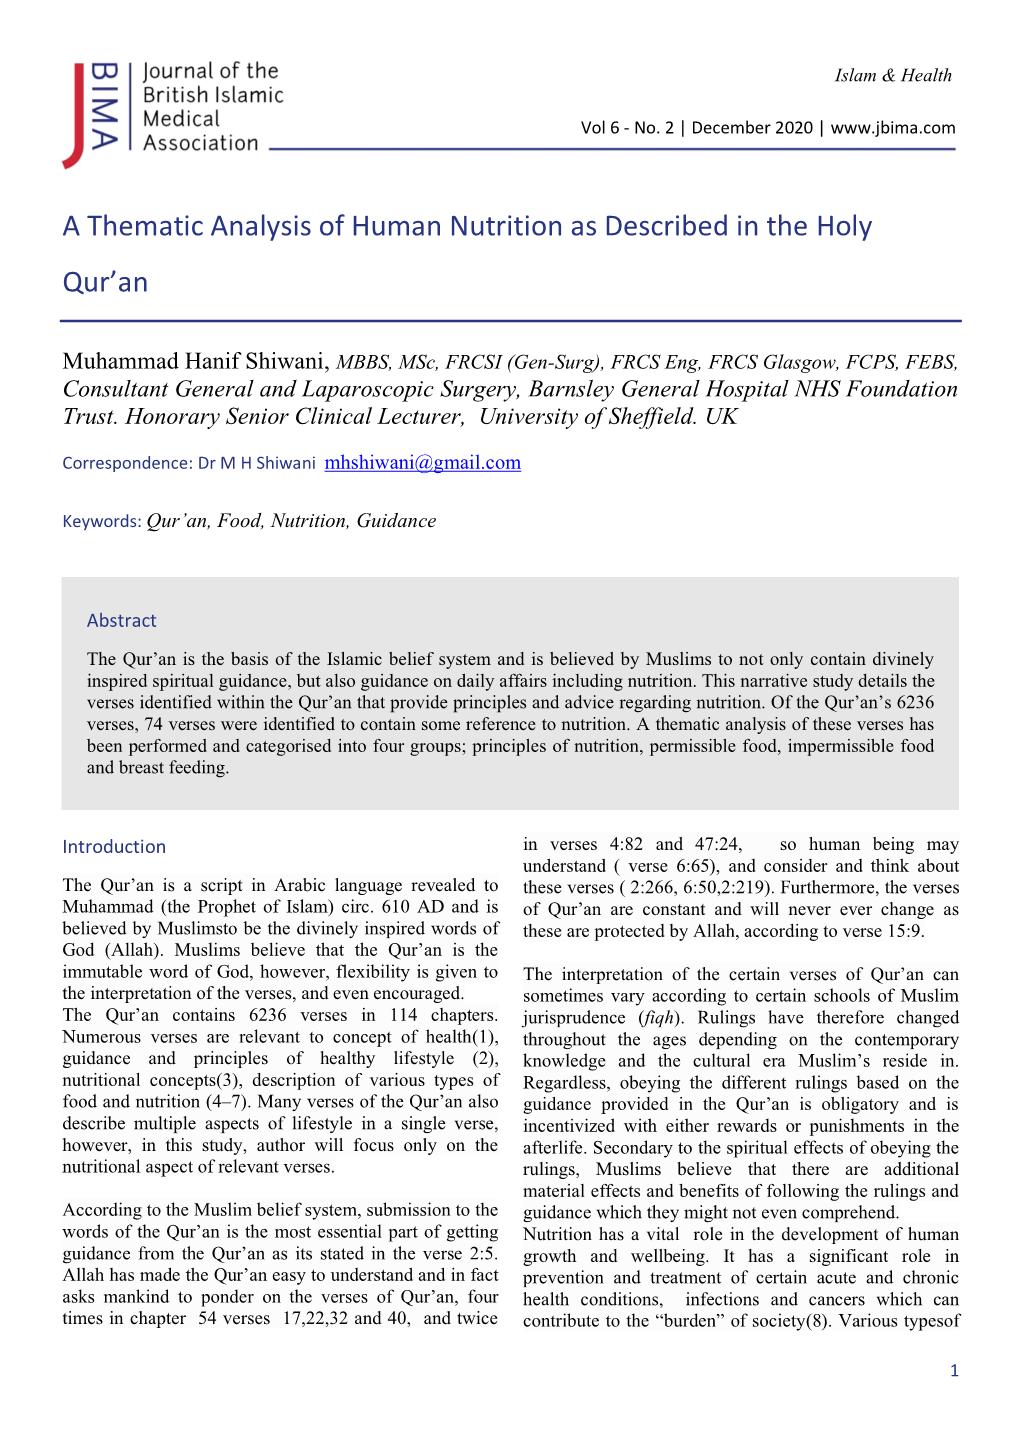 A Thematic Analysis of Human Nutrition As Described in the Holy Qur’An